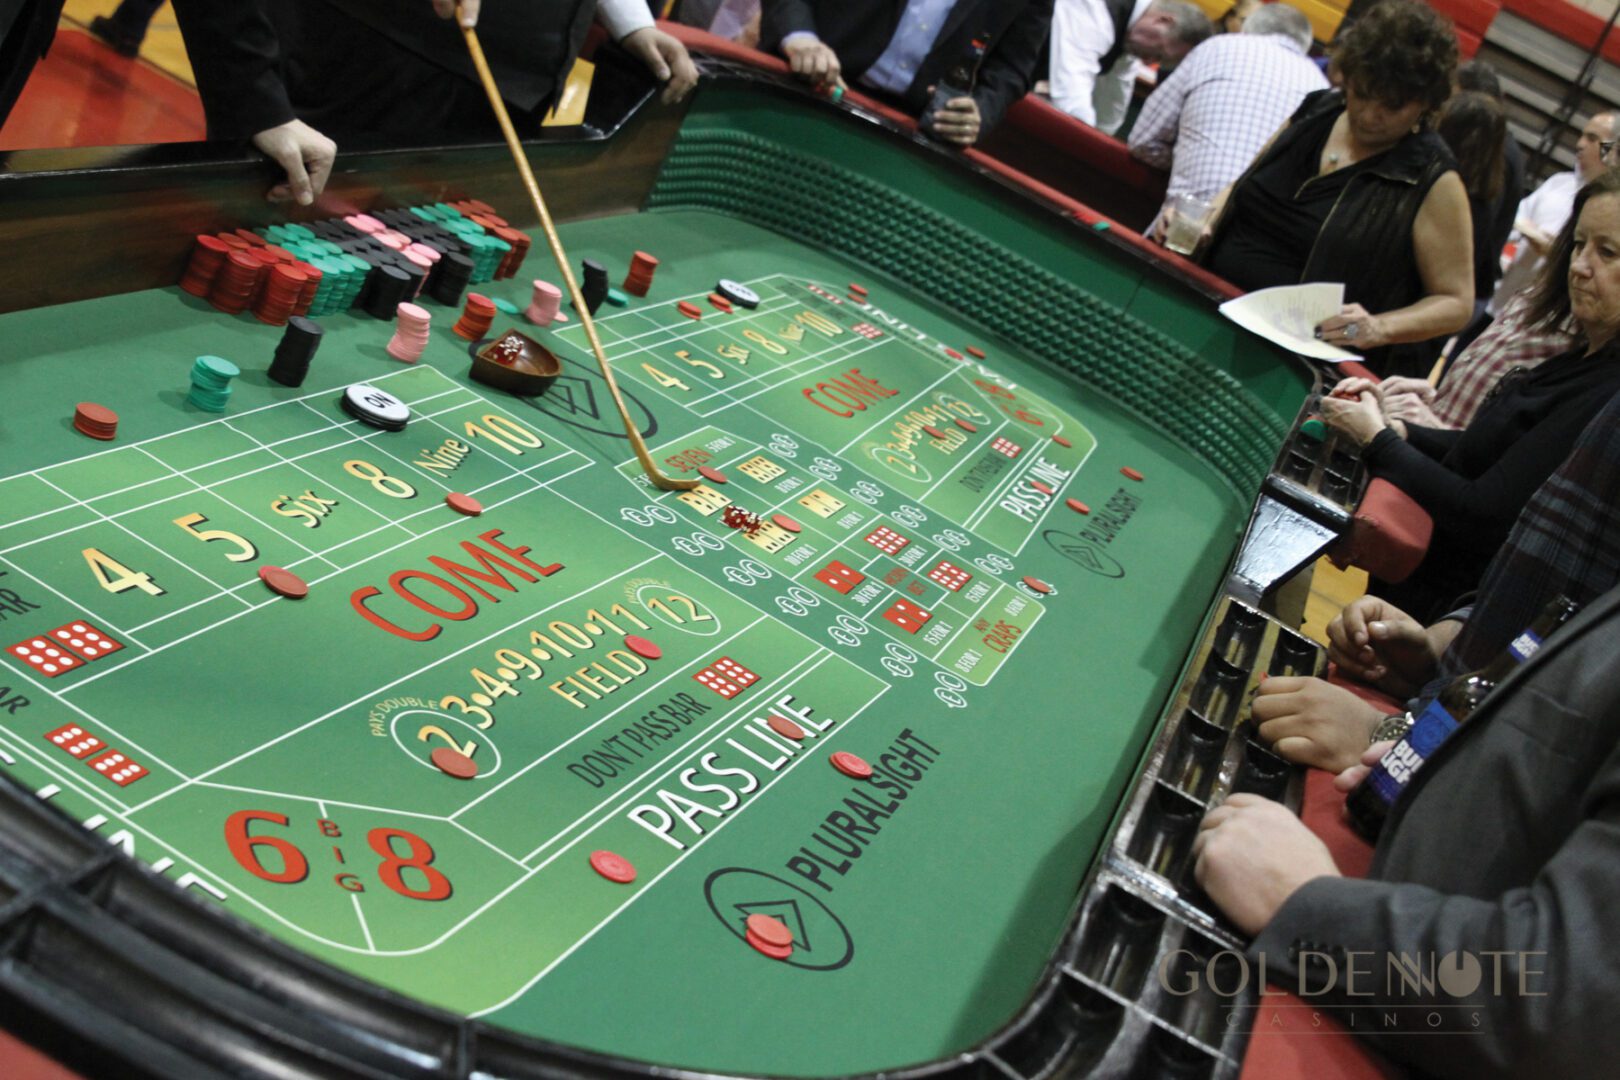 A group of people standing around a craps table.